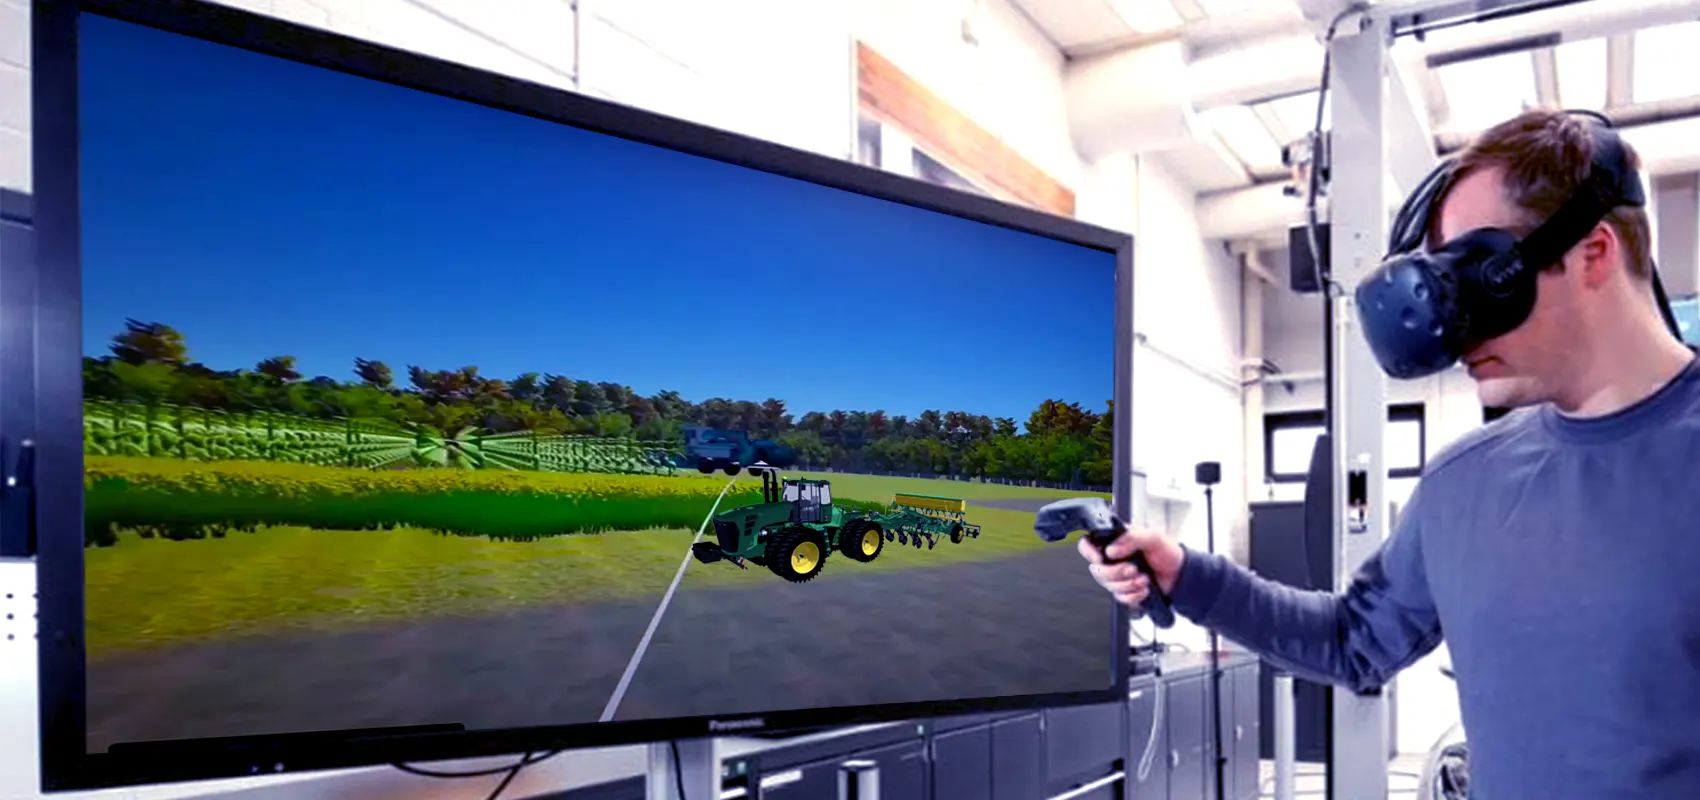 vr training in agriculture